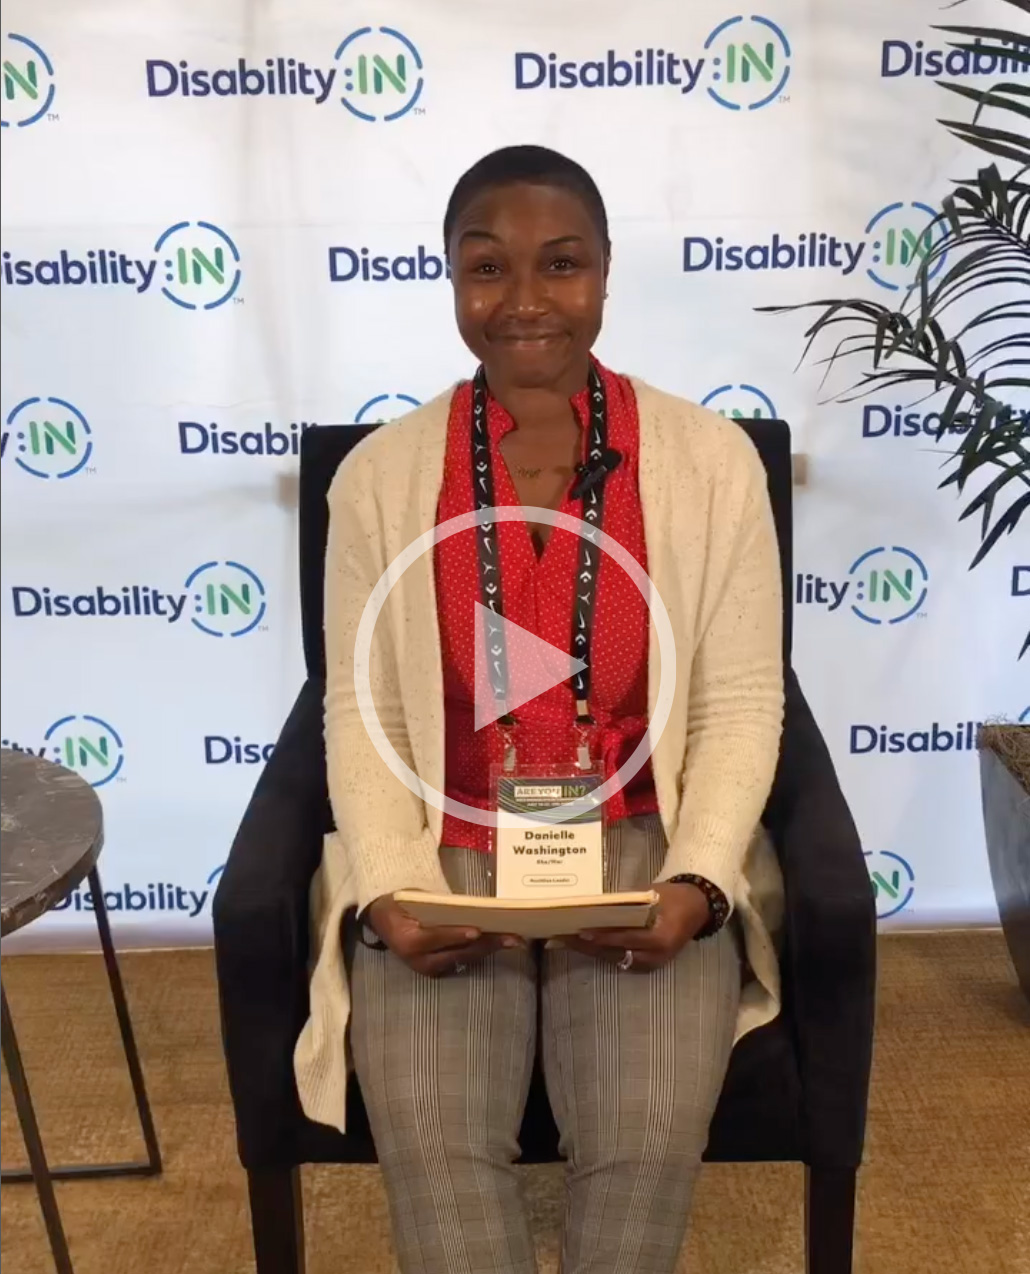 Danielle Washington, a Black woman, sitting in a chair in front of a Disability:IN background.